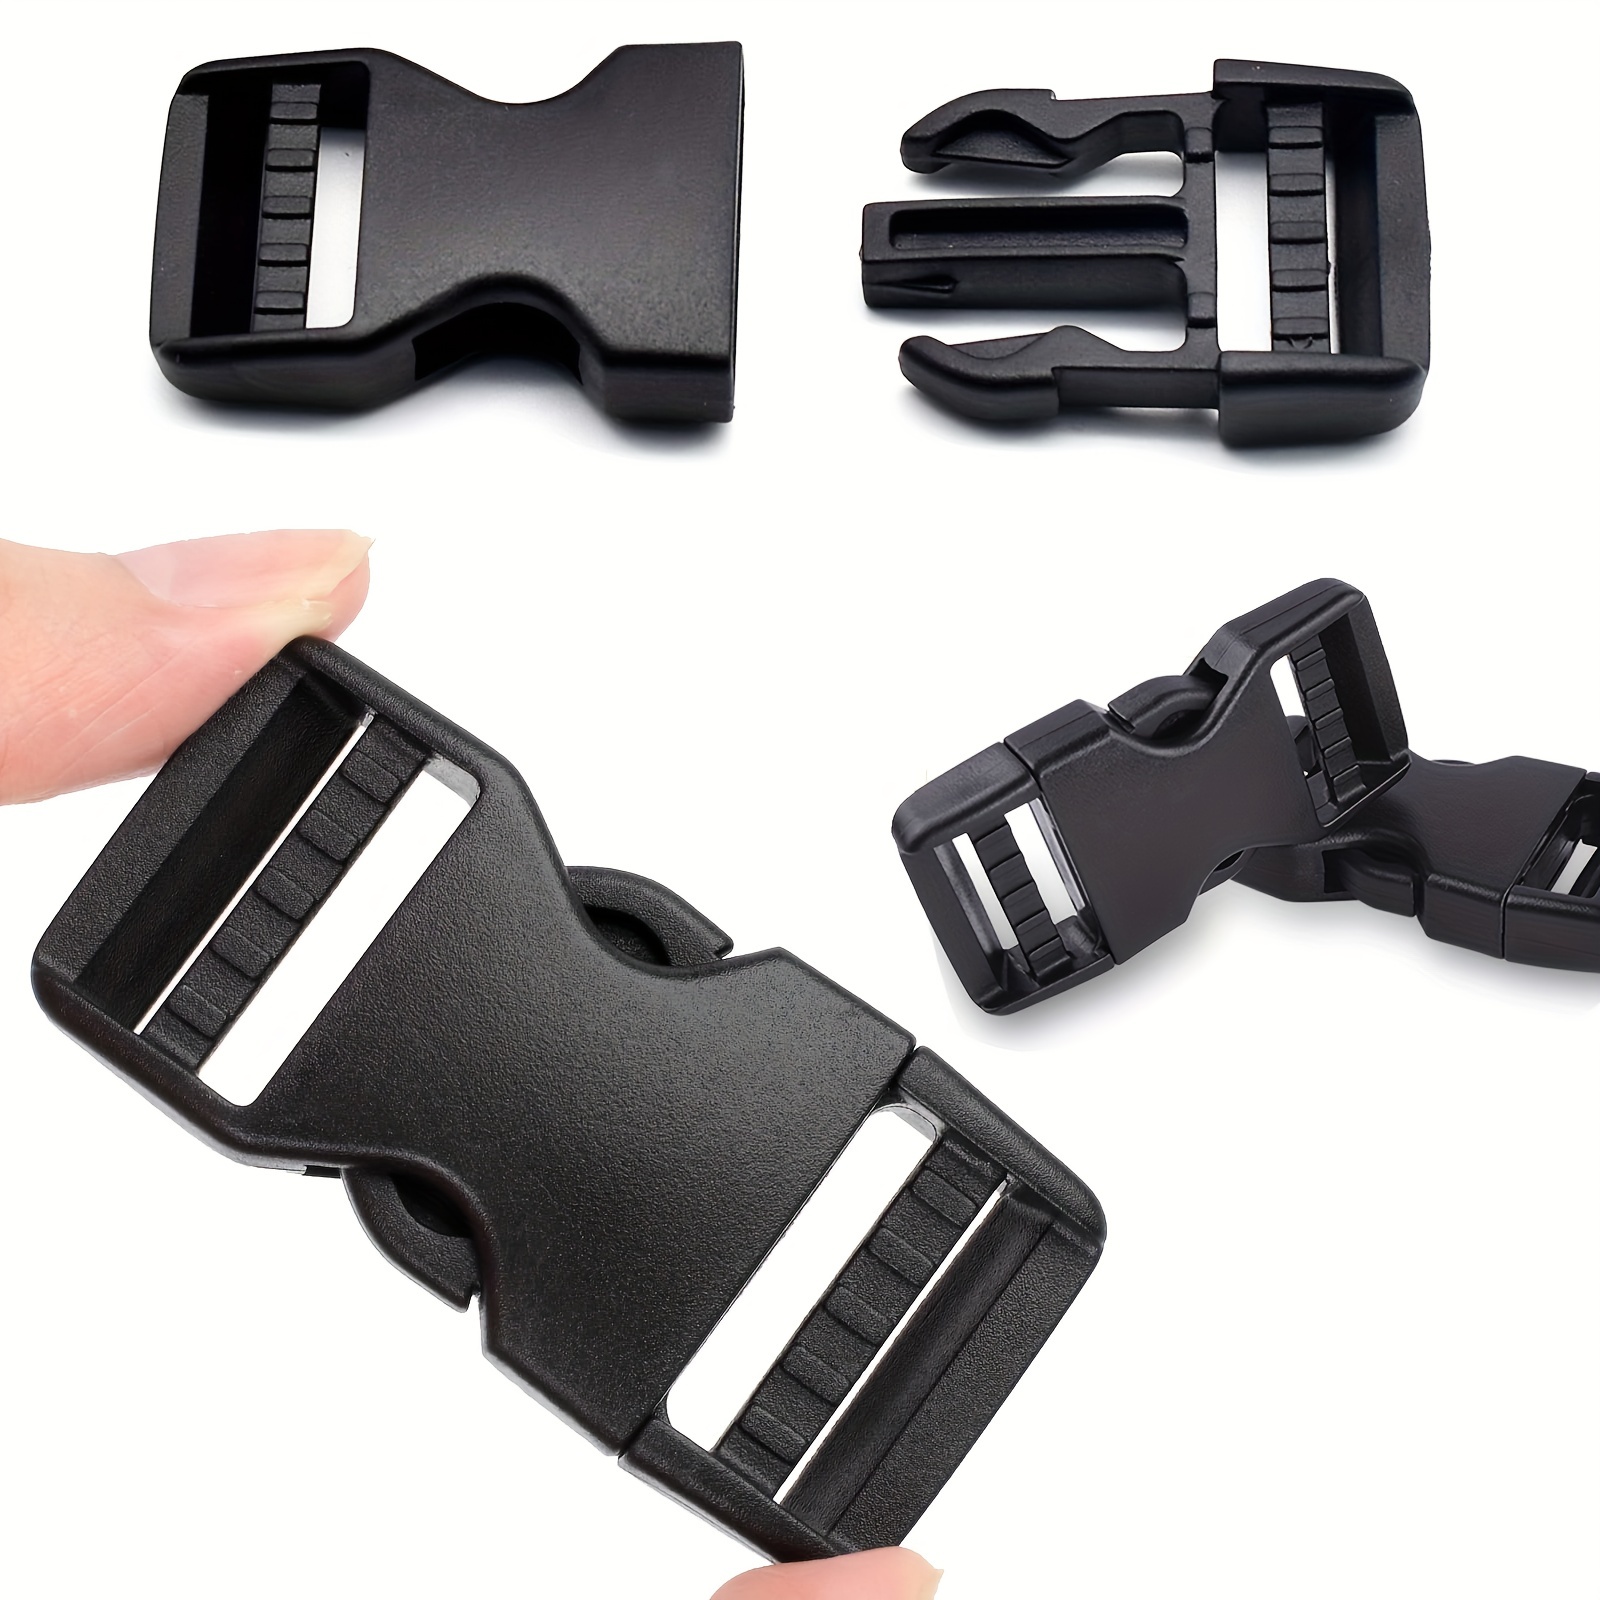 1 inch Buckles Straps Set with 10 Yards Nylon Webbing Strap,10 pcs Quick  Side Release Plastic Buckle, 20 pcs Tri-glide Slide Clip for Luggage Strap